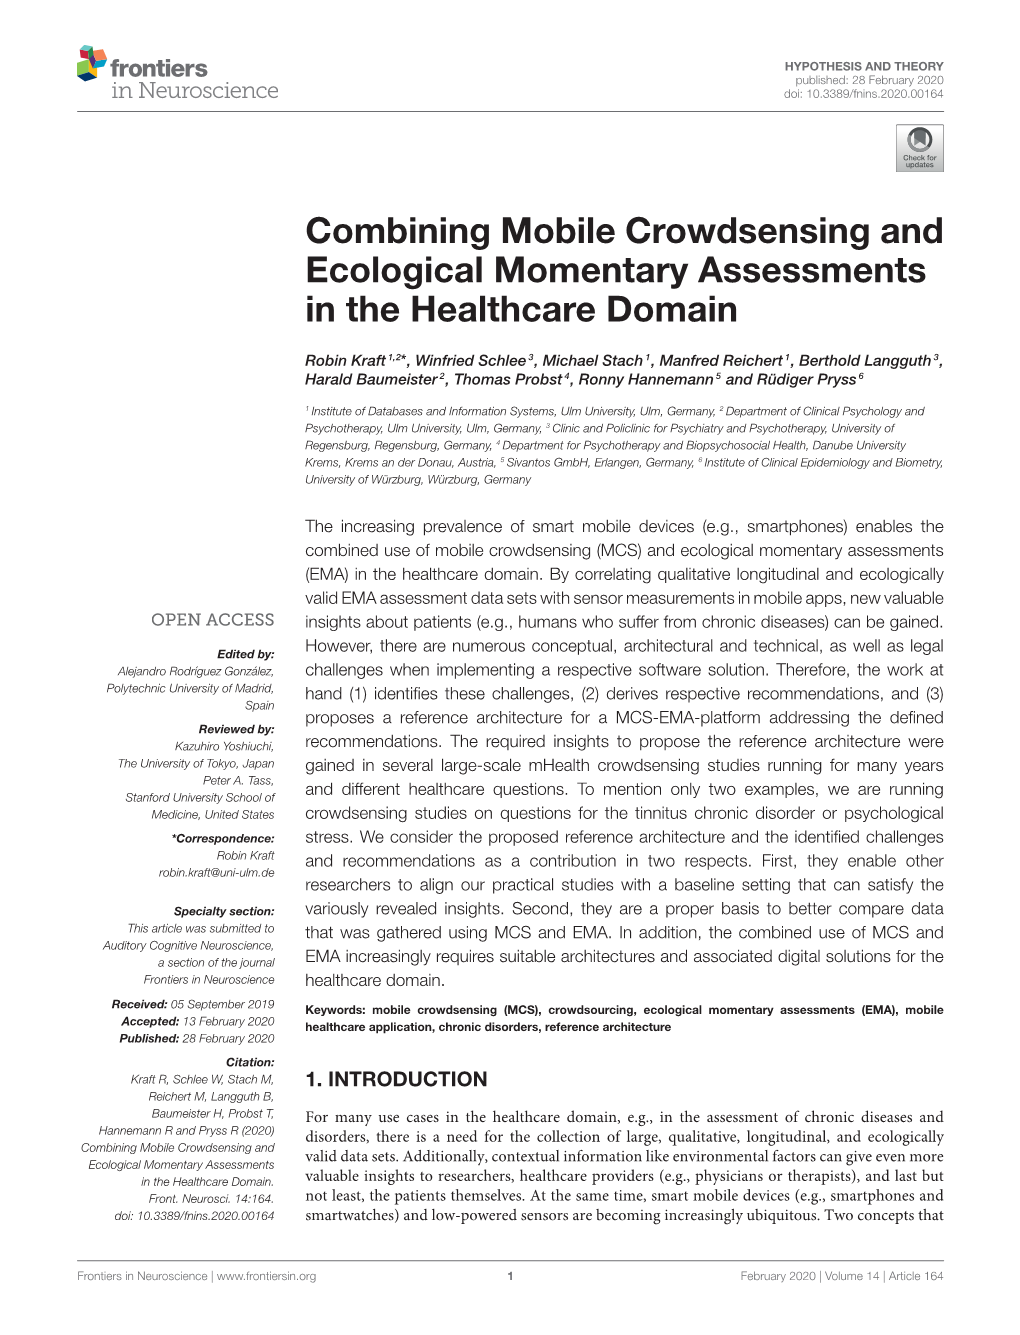 Combining Mobile Crowdsensing and Ecological Momentary Assessments in the Healthcare Domain